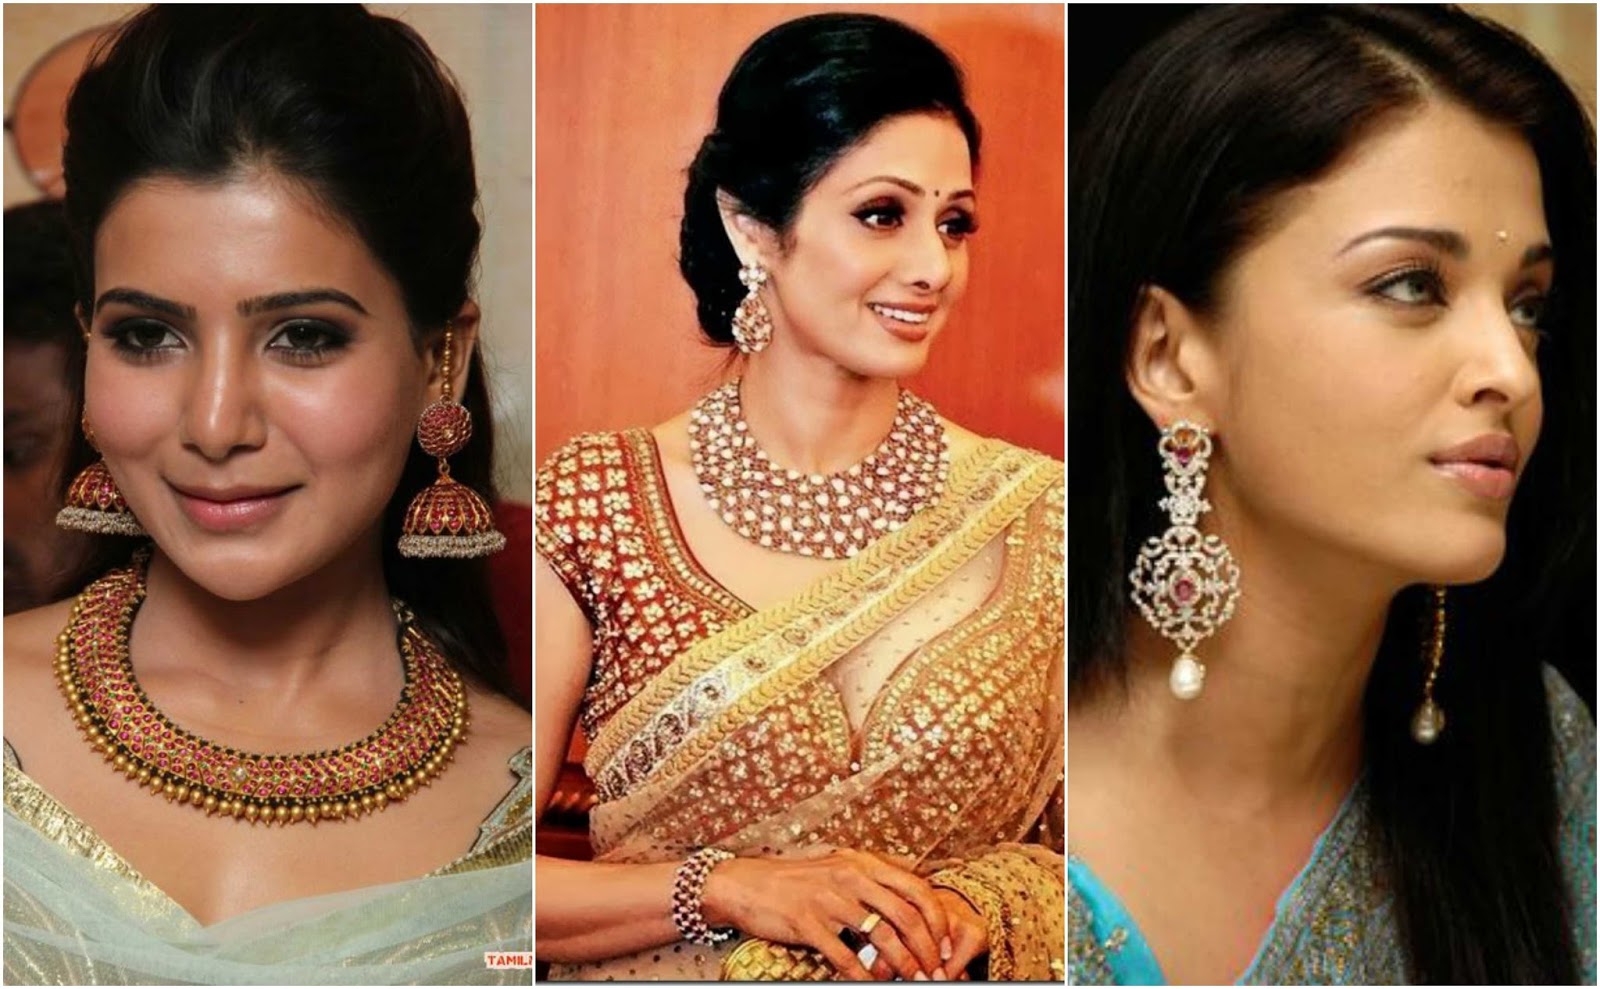 Top 4 Lessons to Take from Bollywood Divas This Diwali